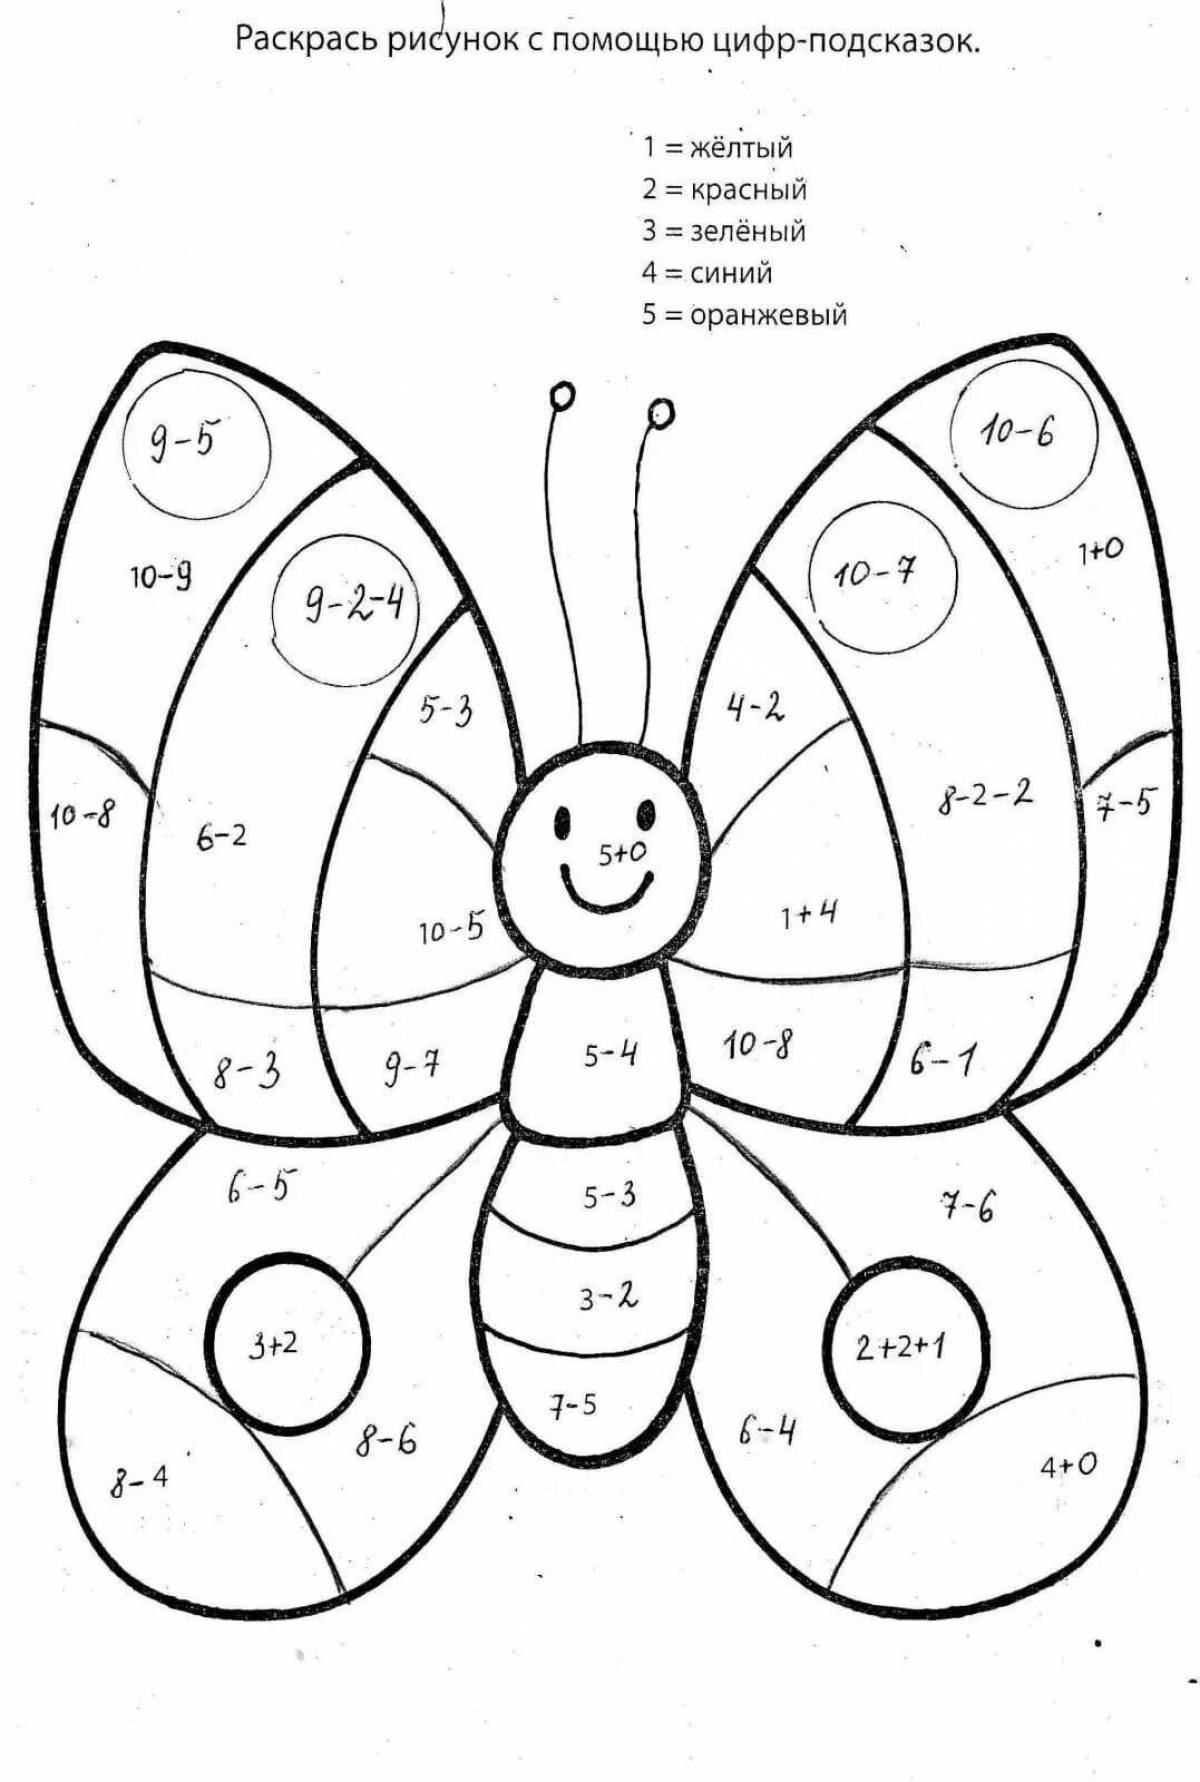 Fun math coloring book for 7-8 year olds